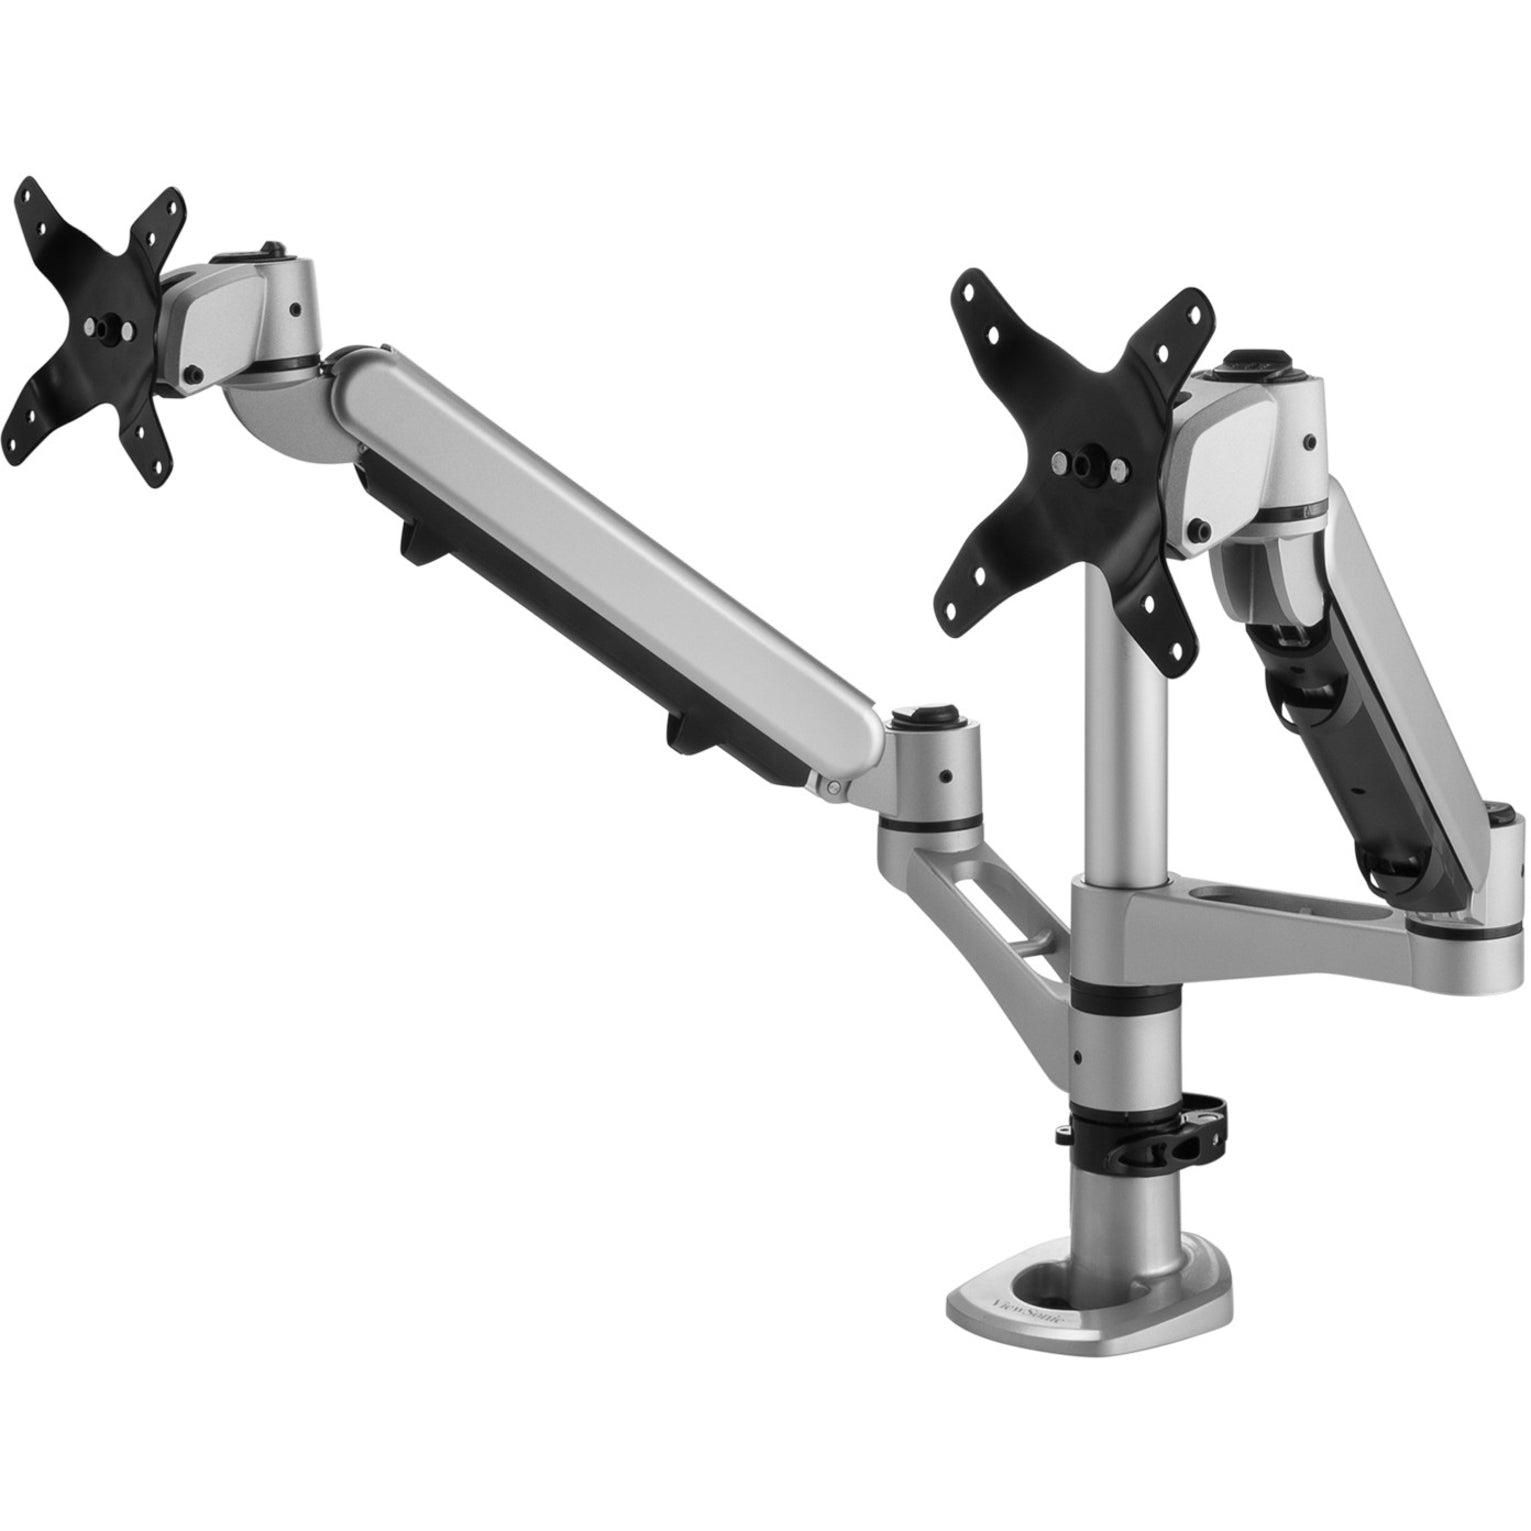 ViewSonic LCD-DMA-002 Spring-Loaded Dual Monitor Mounting Arm for Two Monitors up to 27", Adjustable Tension, Ergonomic, Cable Management